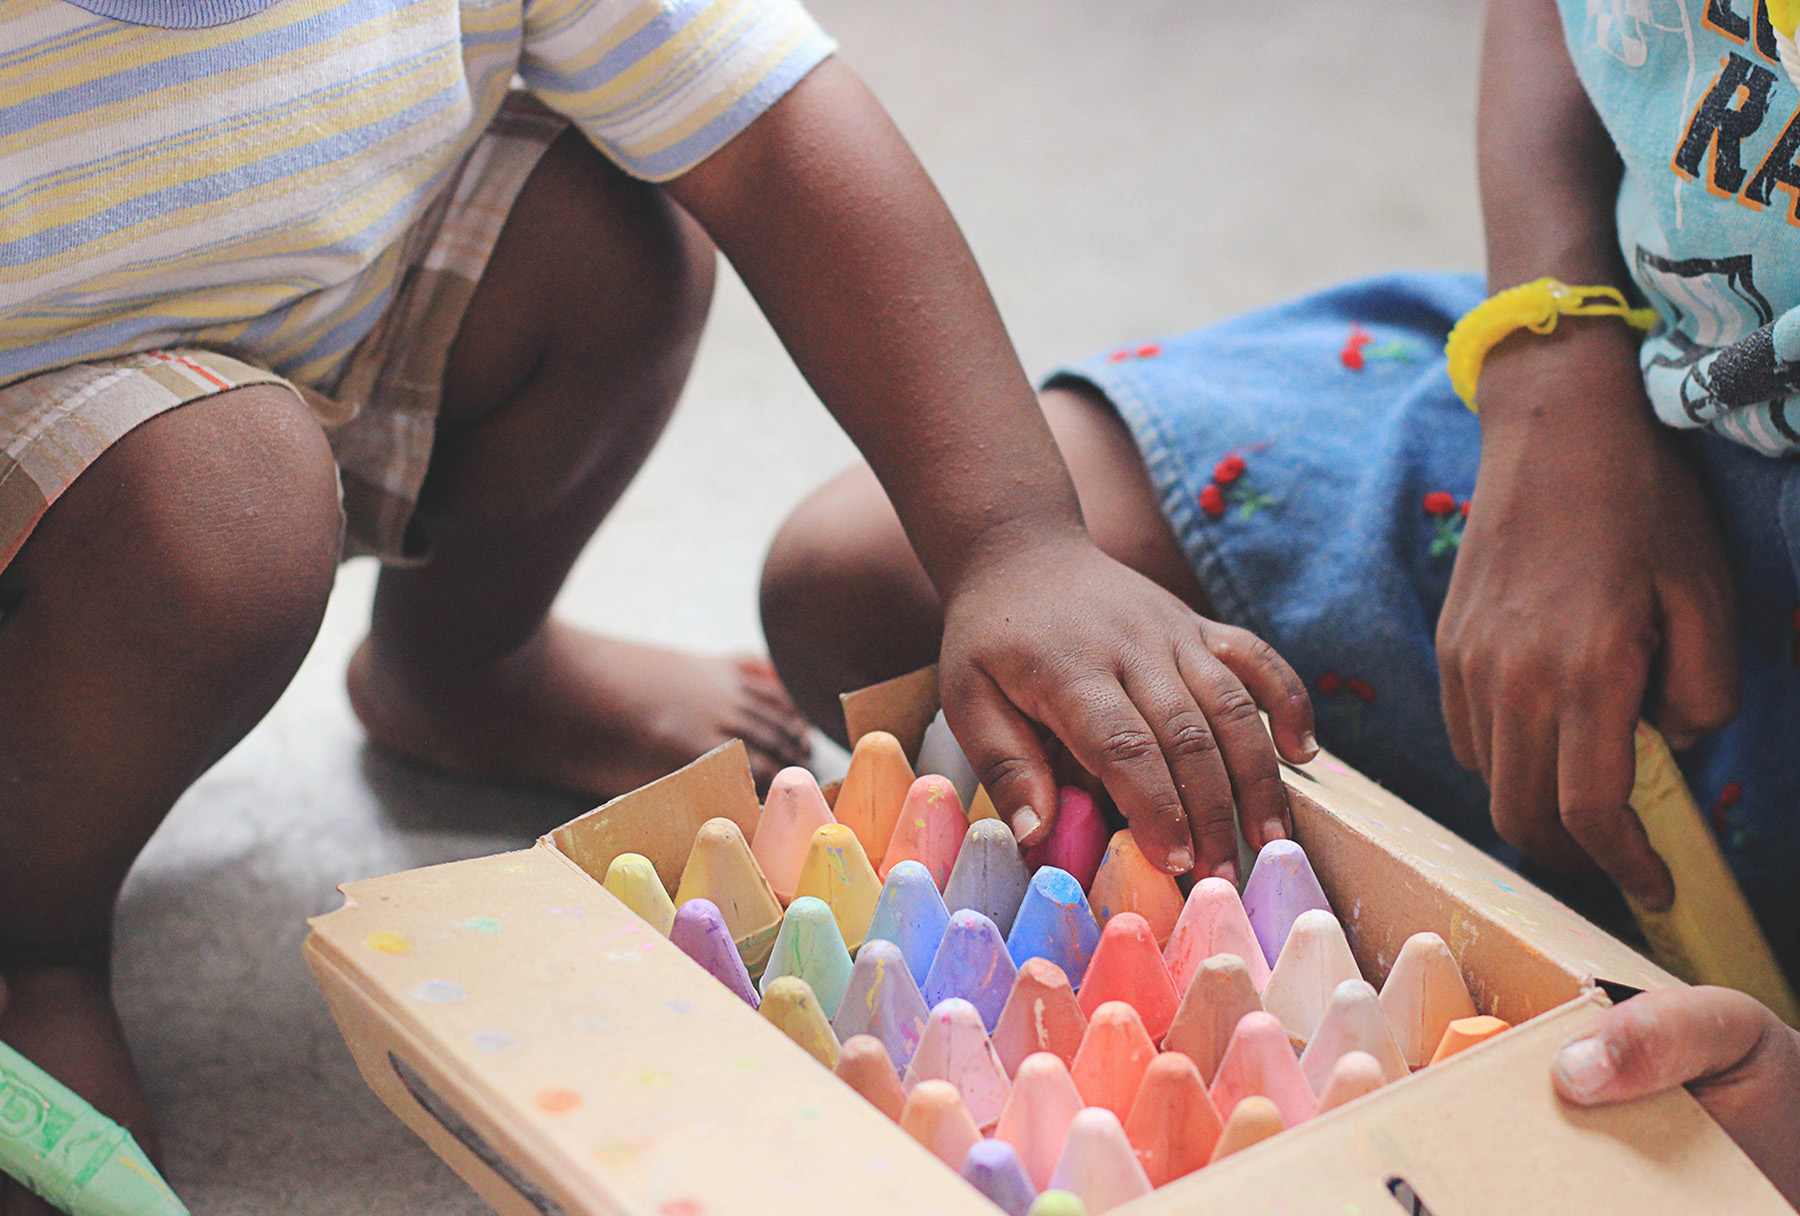 Children playing with chalk